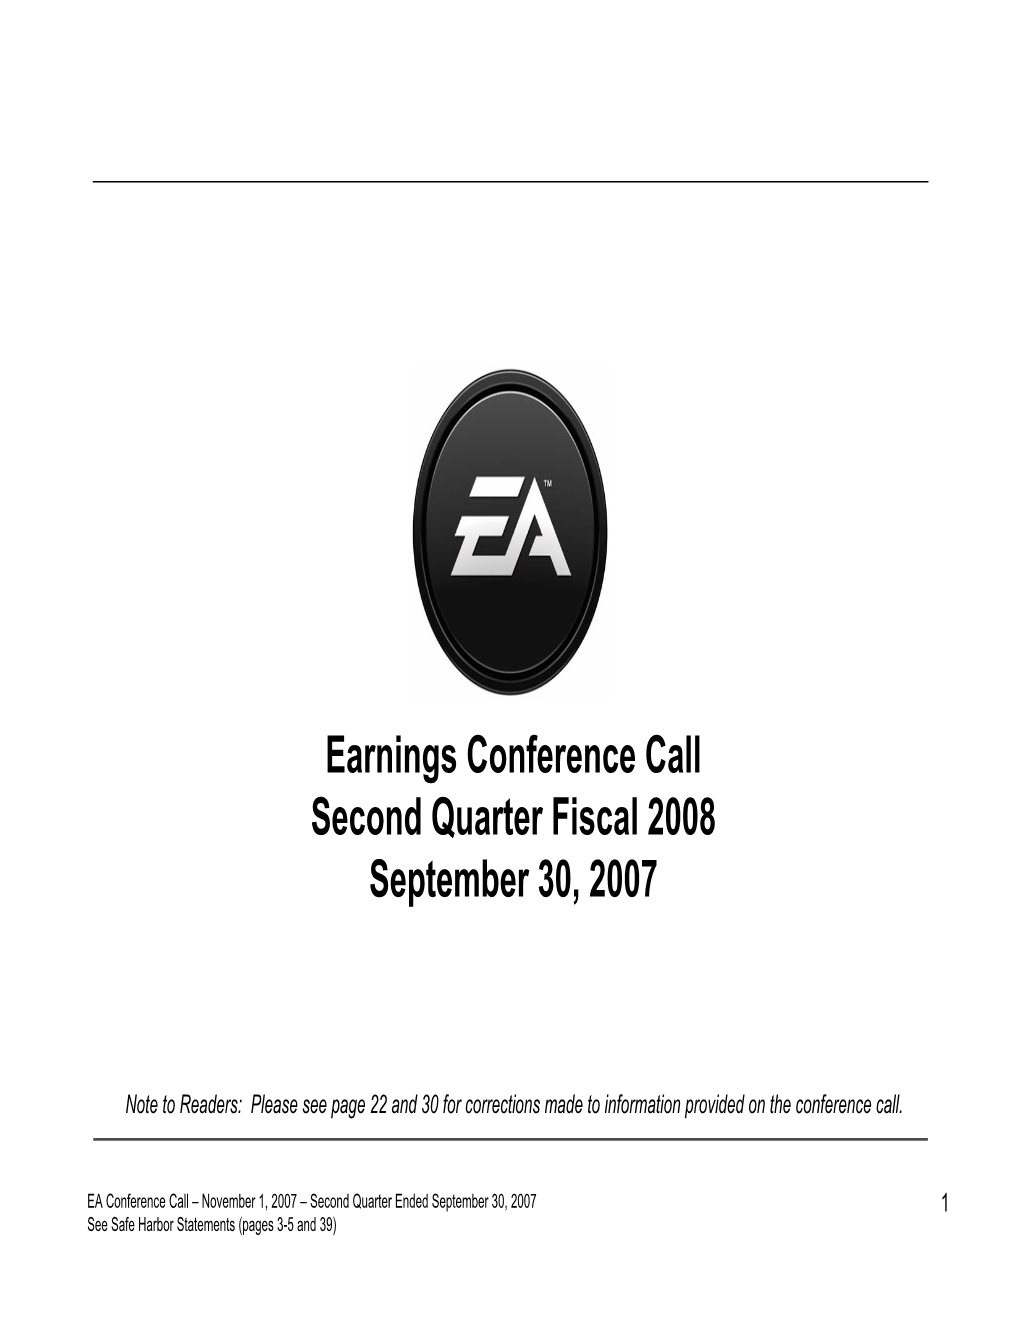 Earnings Conference Call Second Quarter Fiscal 2008 September 30, 2007